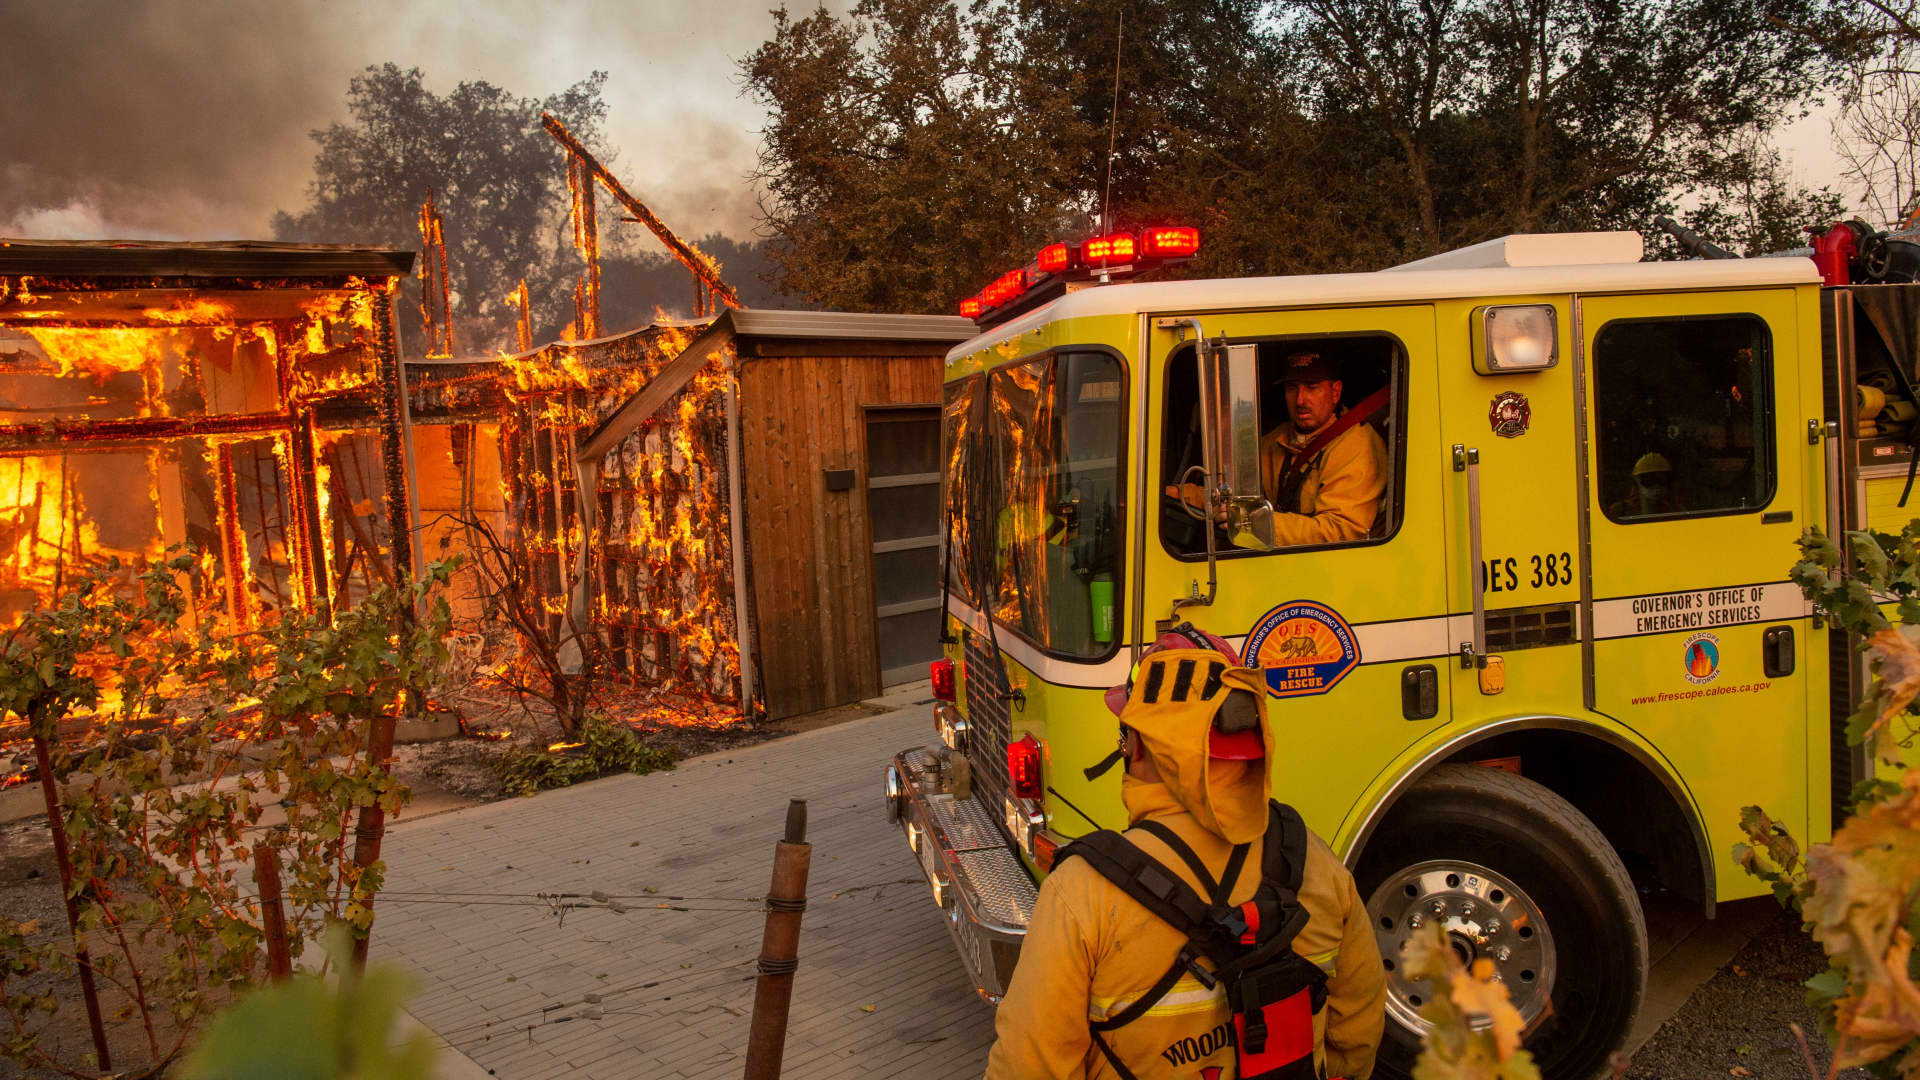 Firefighters pull up to a burning house during the Kincade fire in Healdsburg, California, on Oct. 27, 2019.